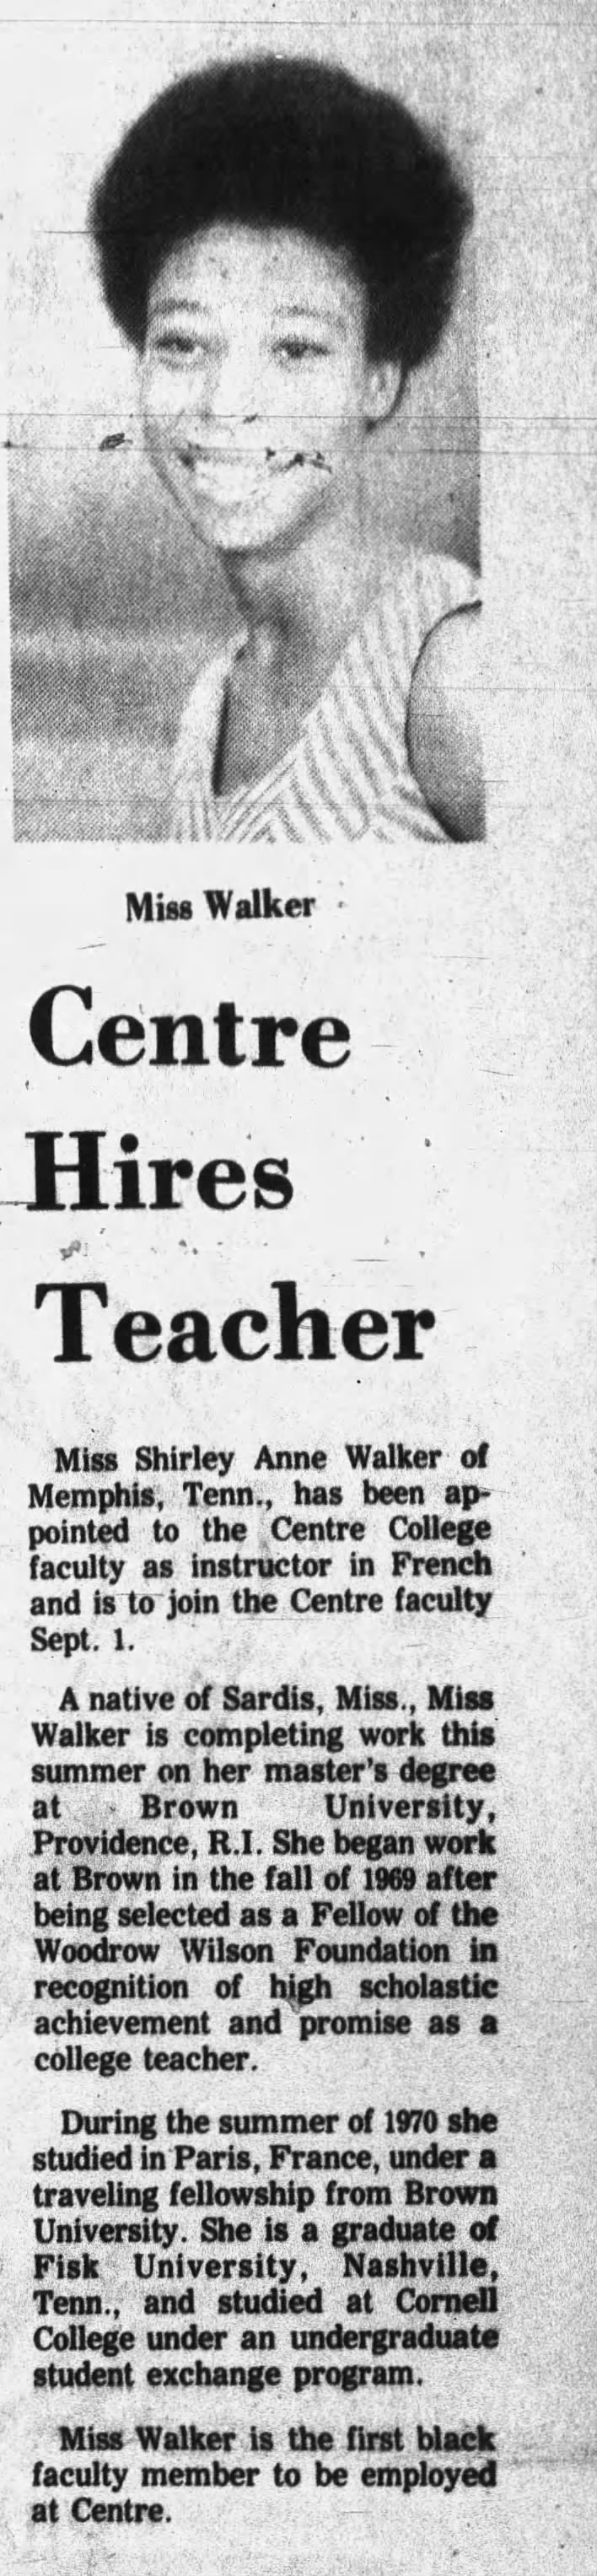 Shirley Anne Walker hired as French Professor at Centre College.